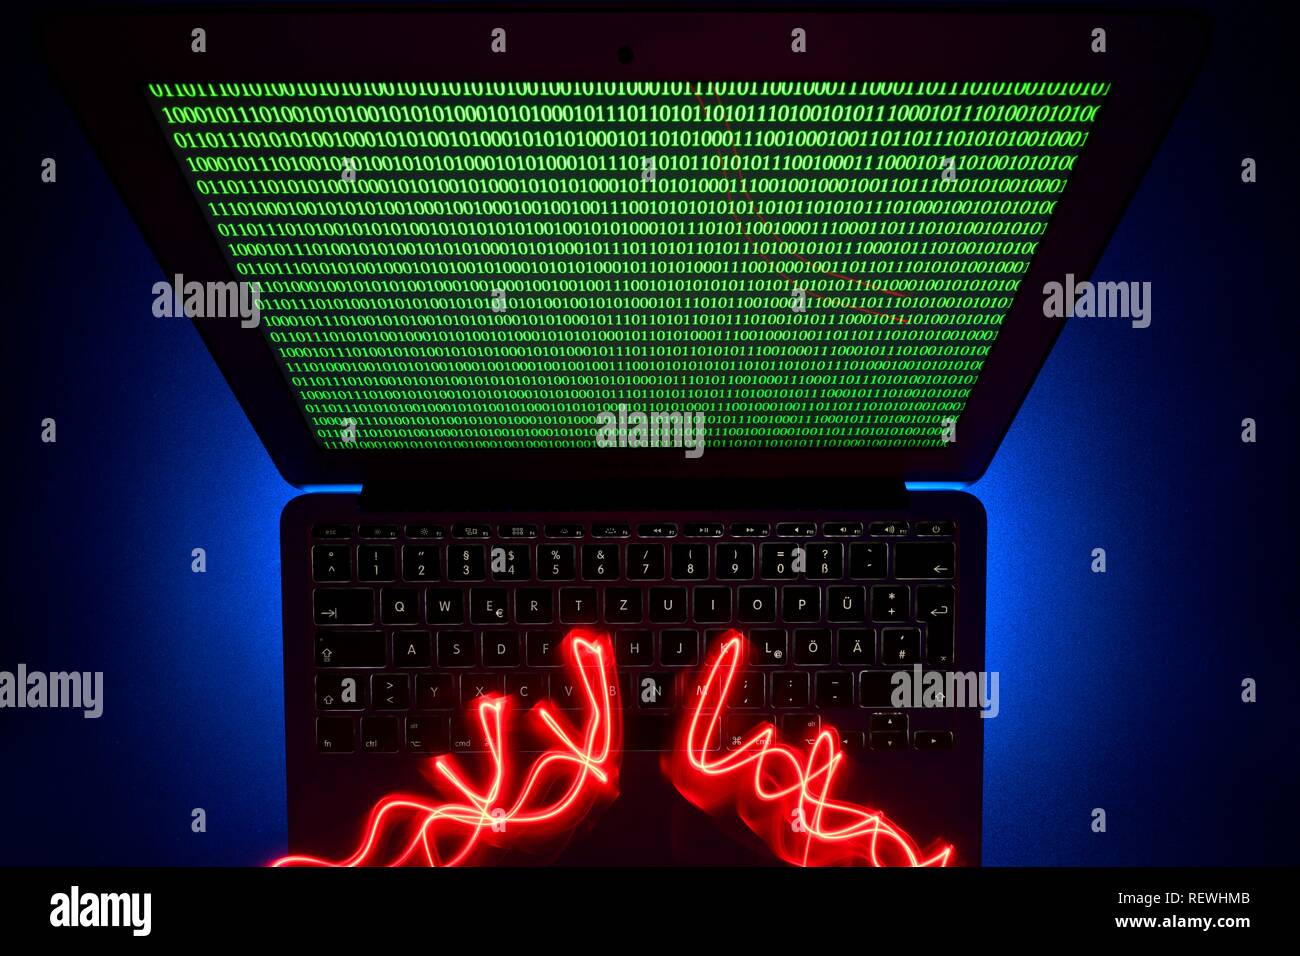 Traces of light on computer keyboard, symbol image cybercrime, computer crime, data protection, Baden-Württemberg, Germany Stock Photo